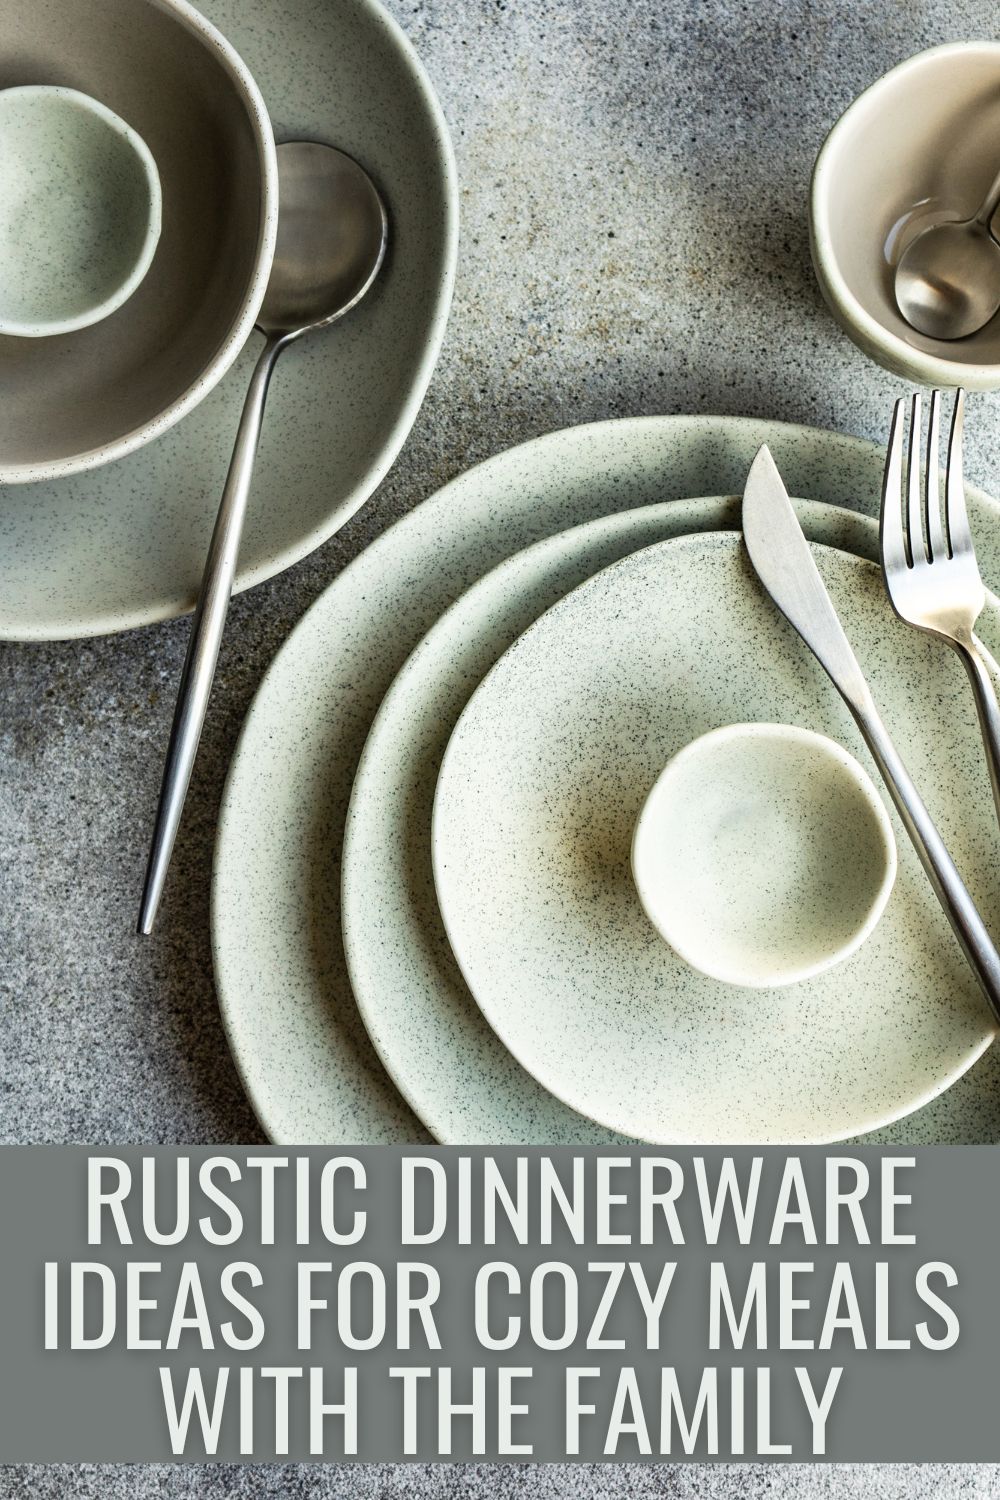 Rustic Dinnerware Ideas For Cozy Meals With The Family.